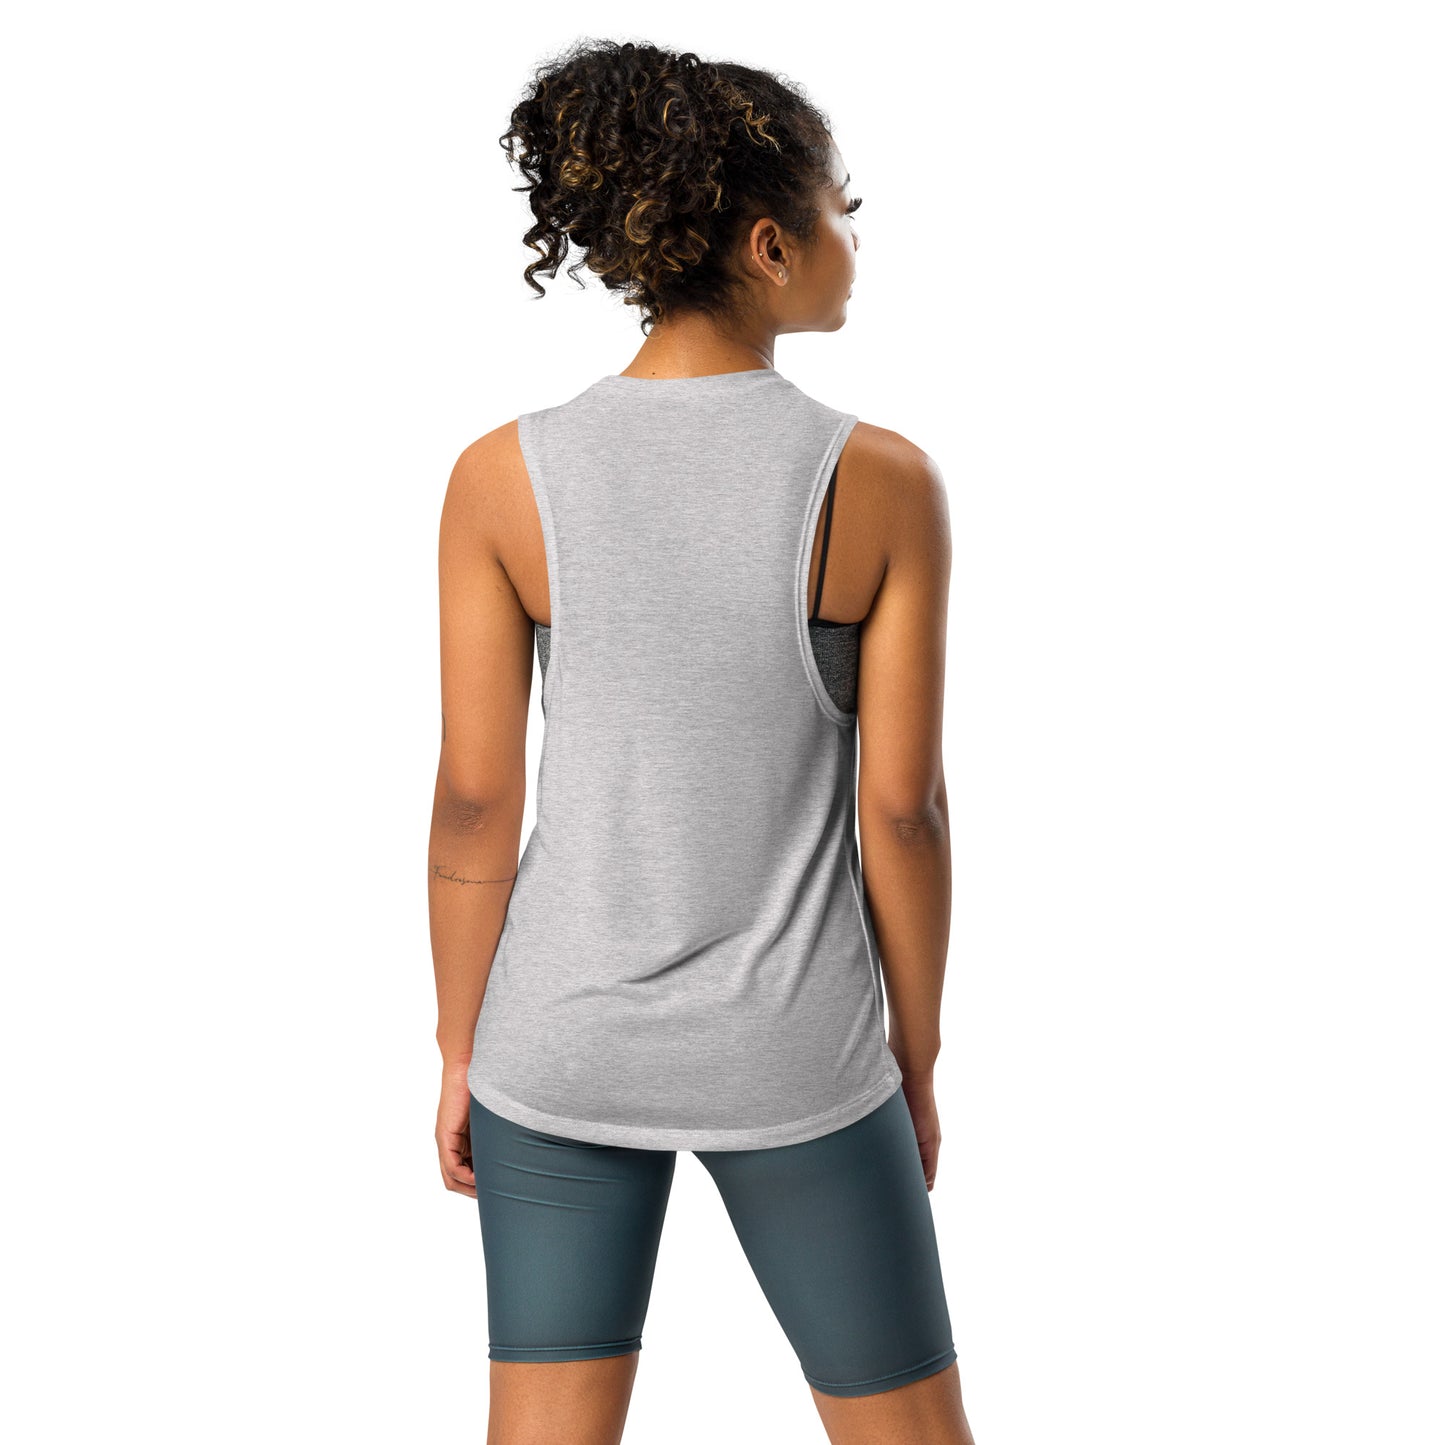 Chinese quince Ladies’ Muscle Tank